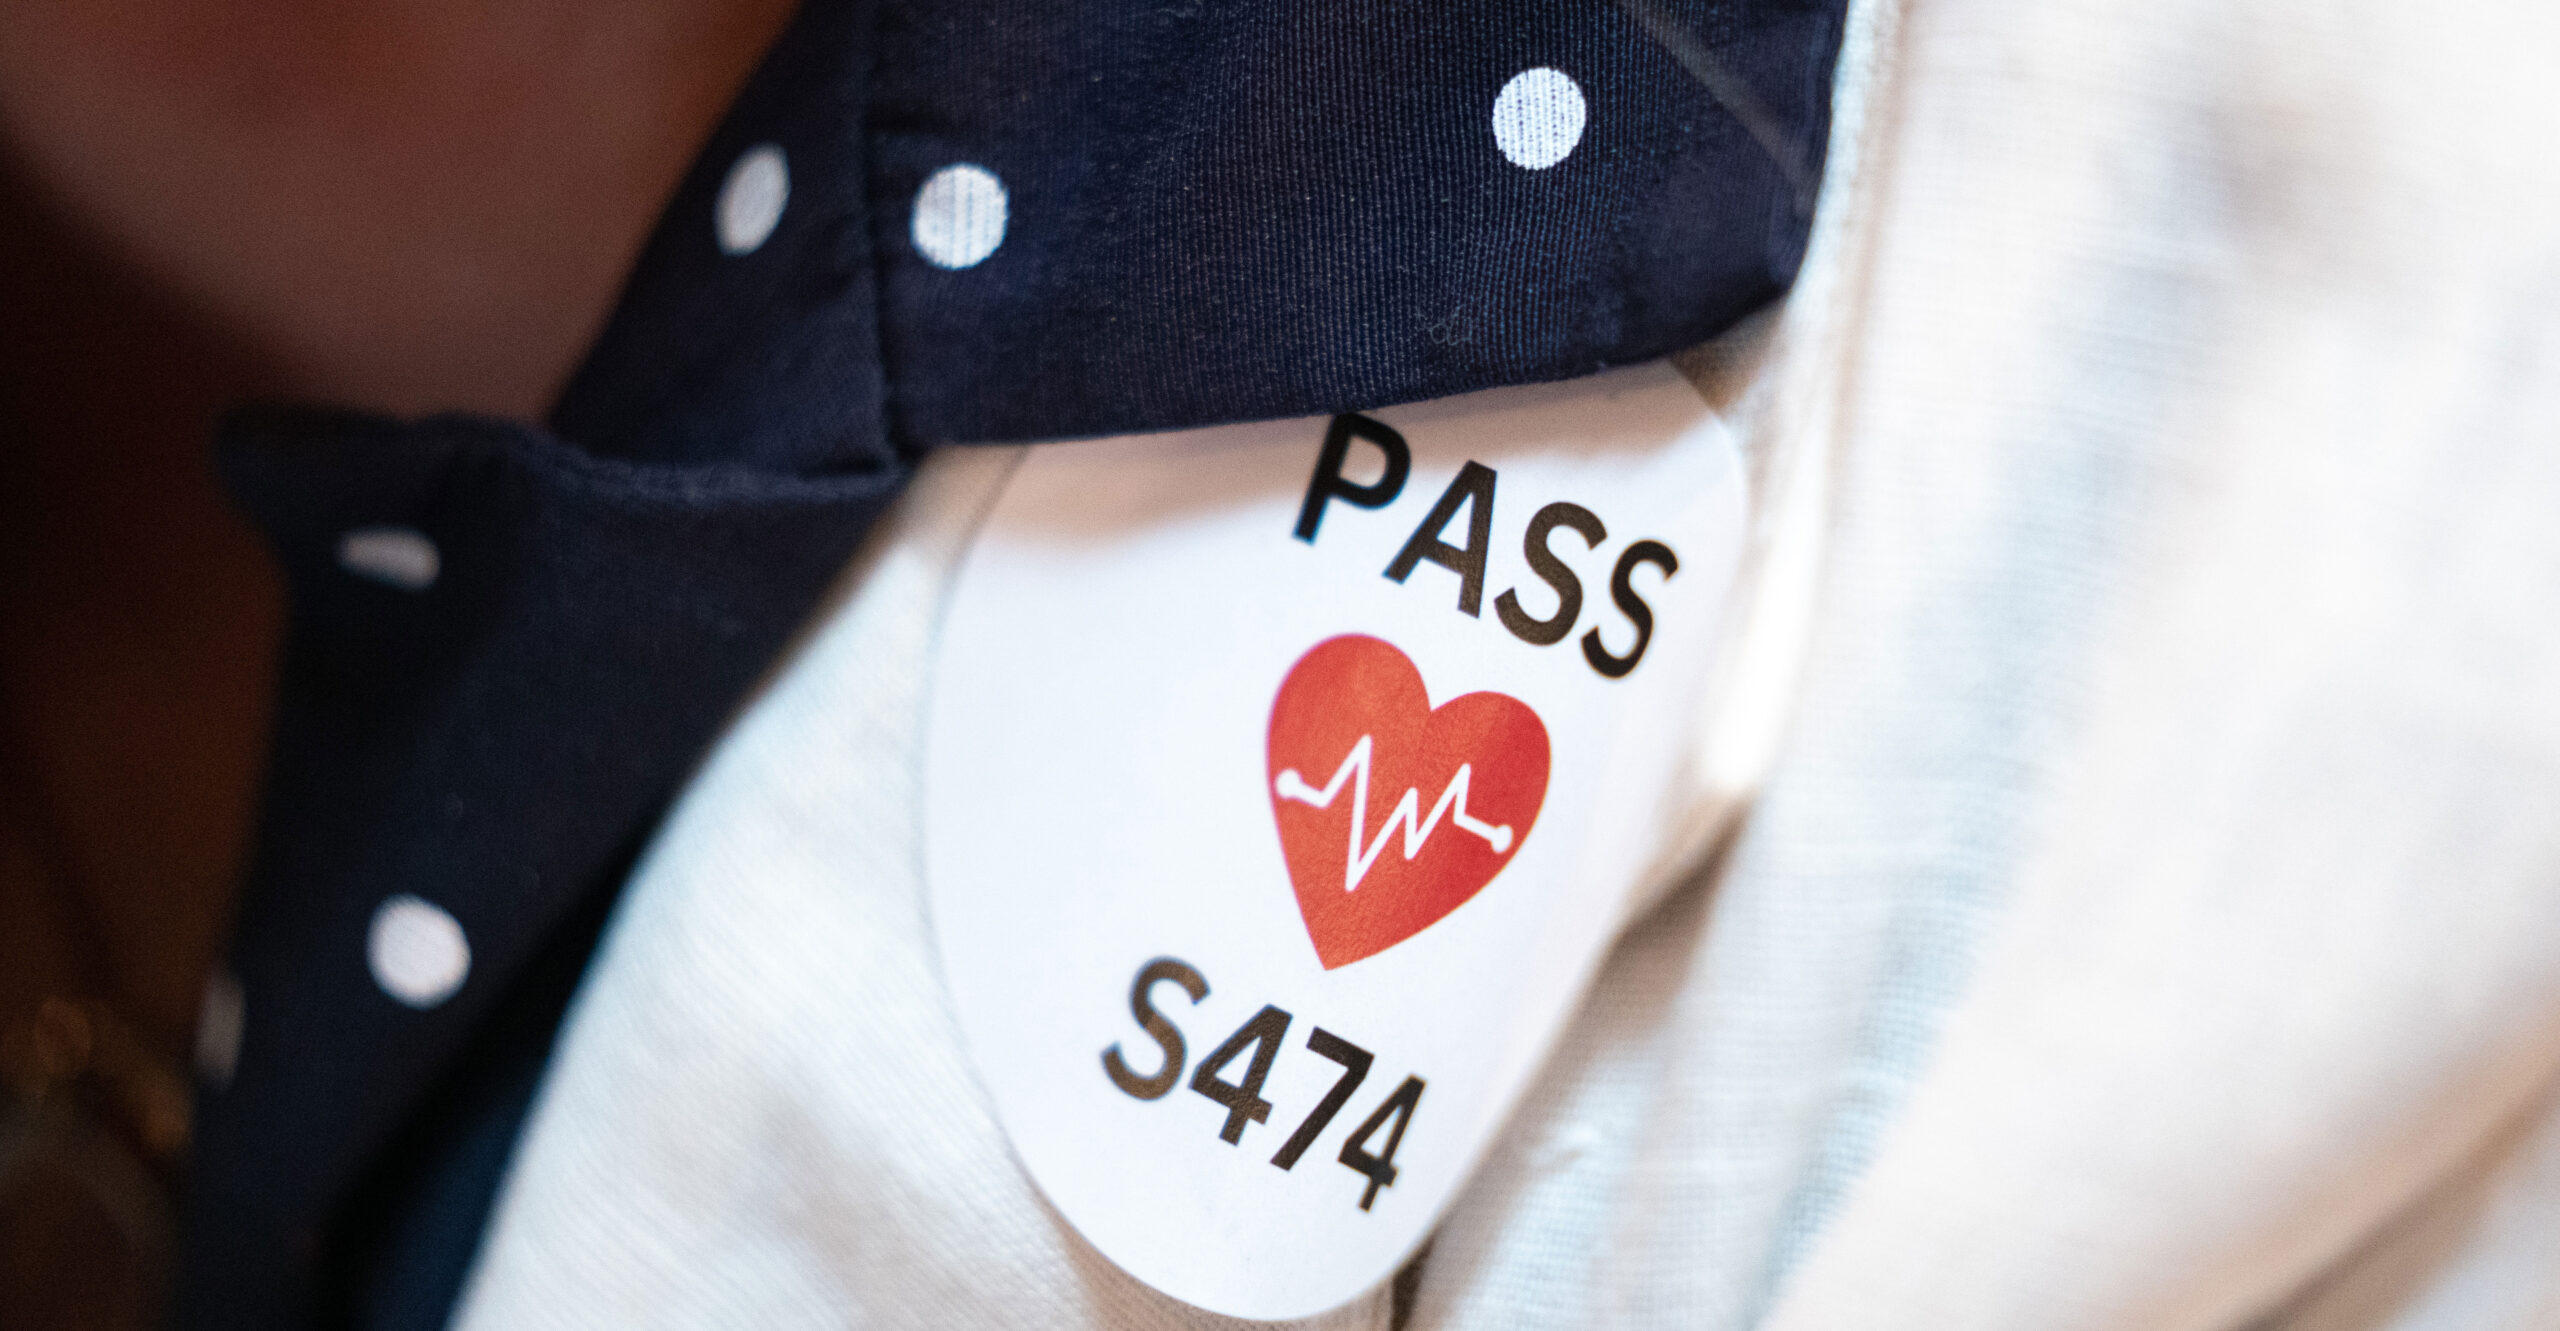 South Carolina Supreme Court Upholds Ban on Post-Heartbeat Abortions